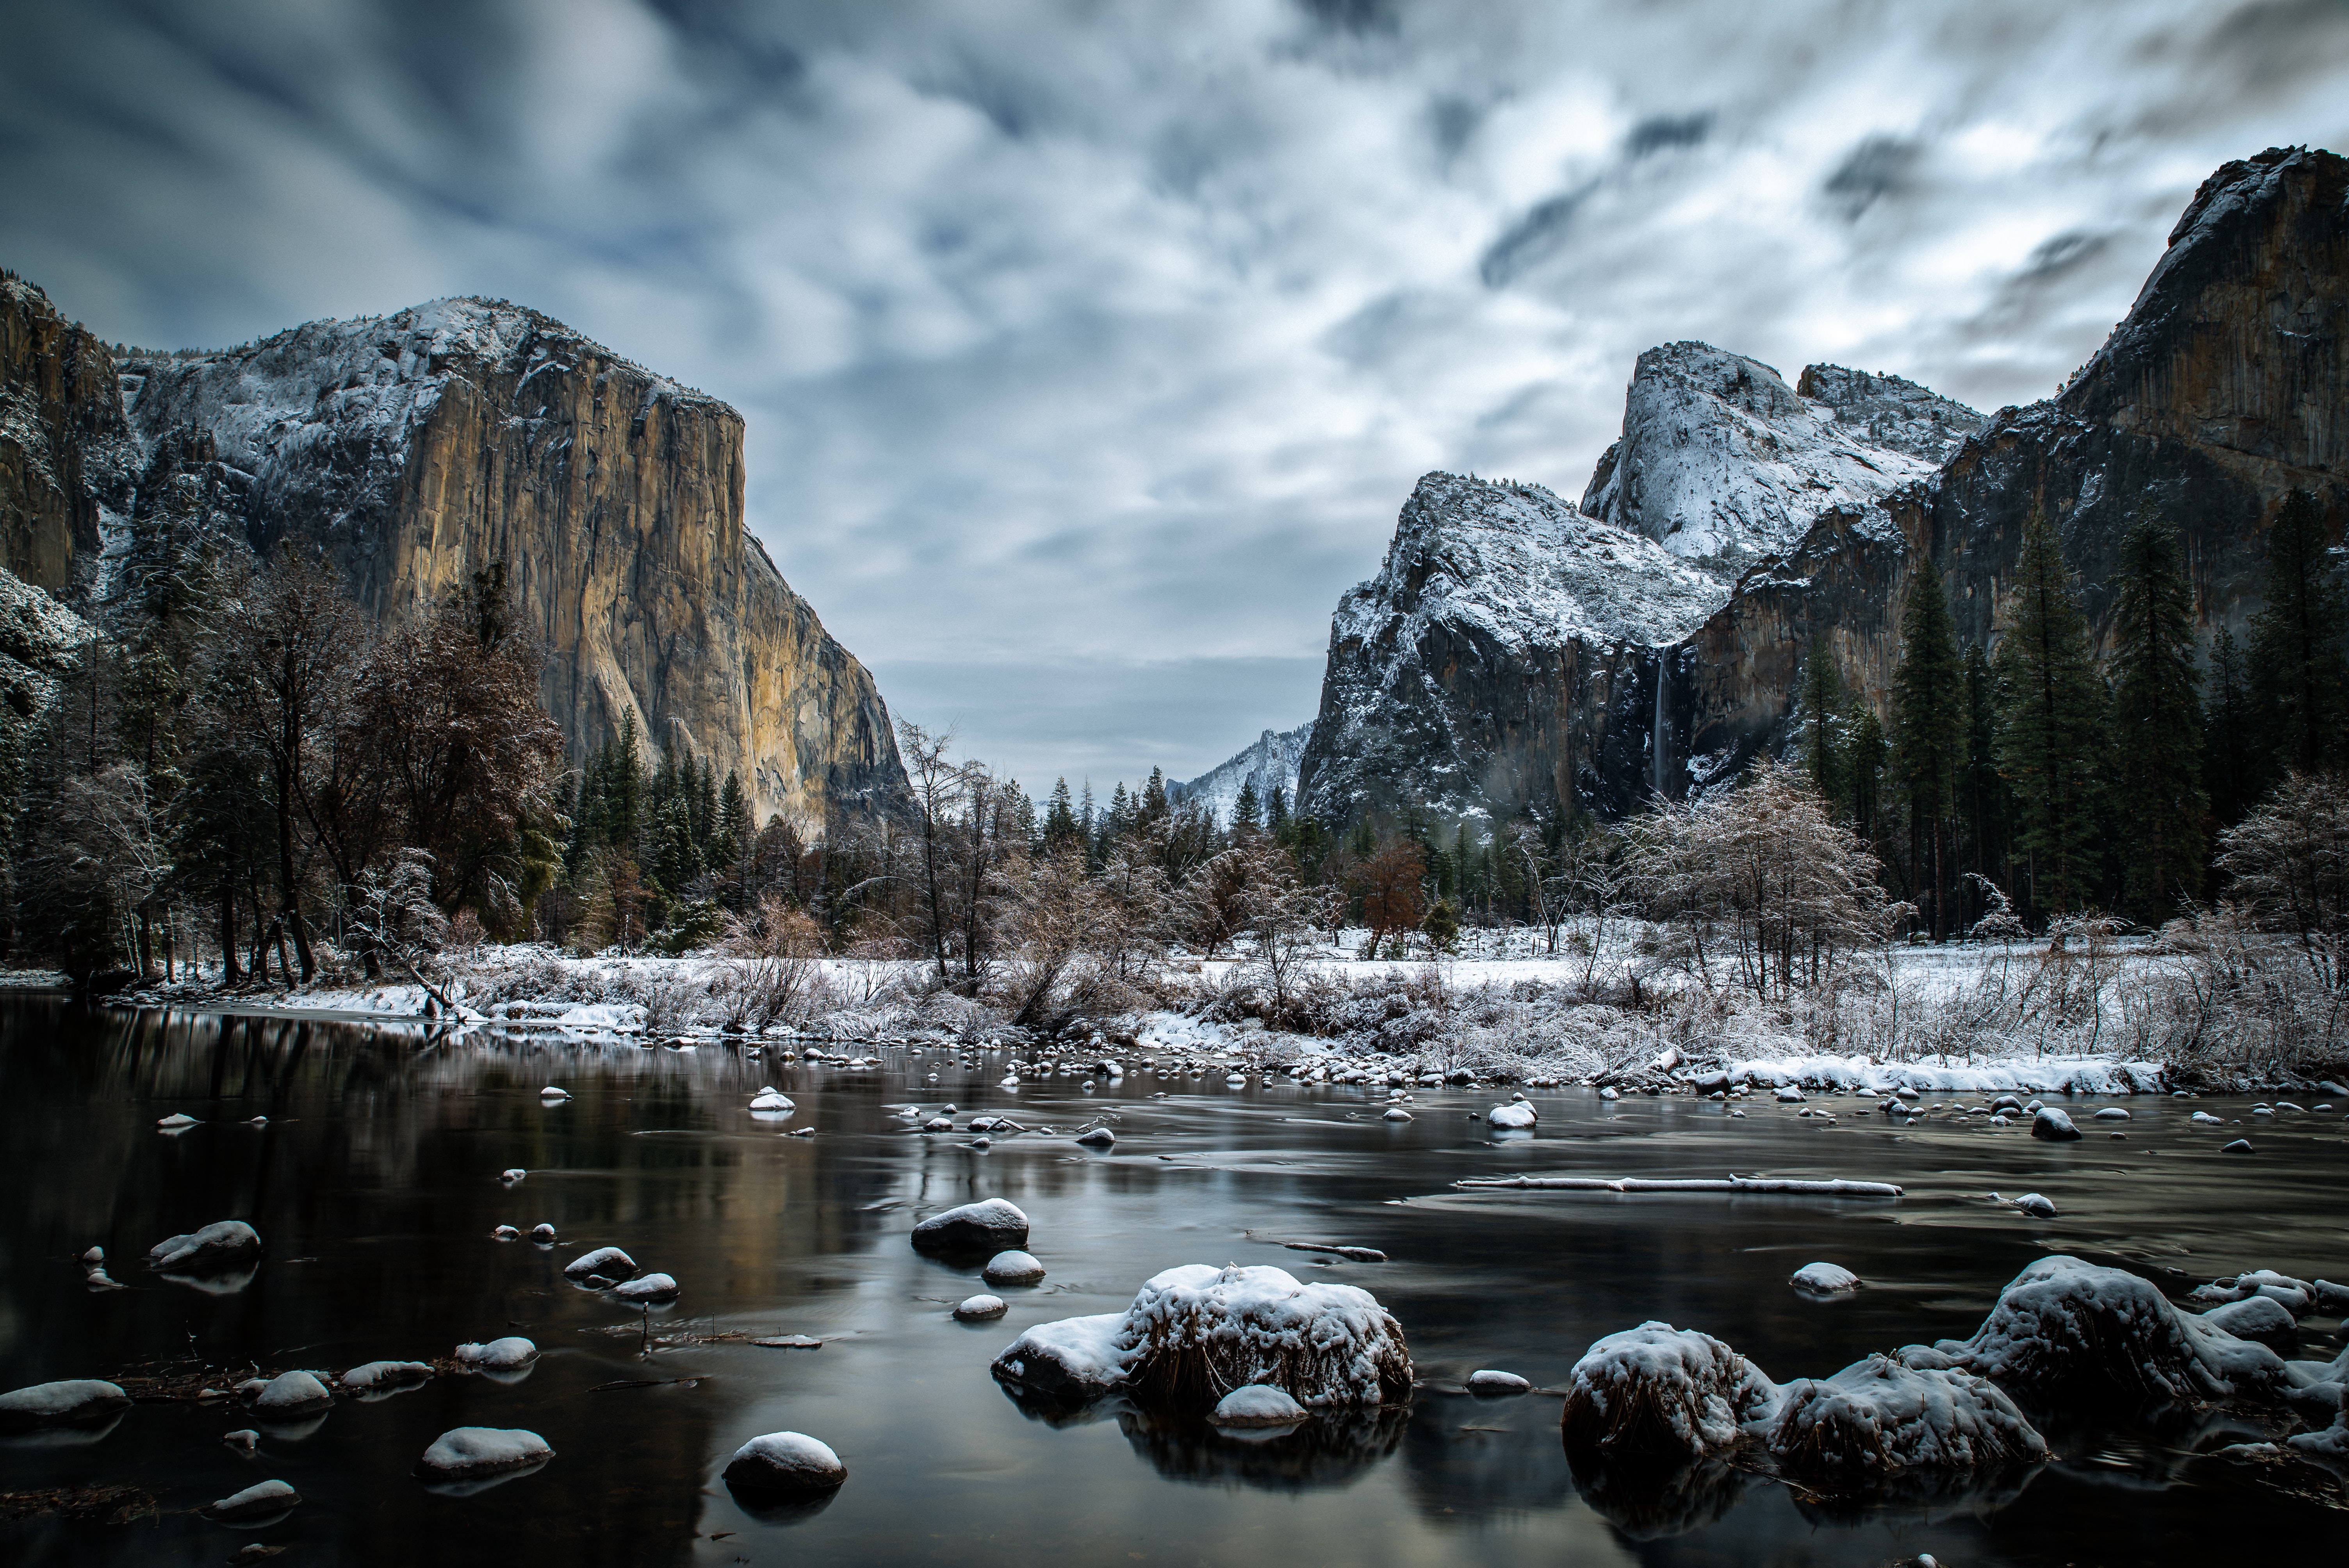 General 6016x4016 nature landscape mountains clouds long exposure river forest trees winter Yosemite National Park El Capitan California USA